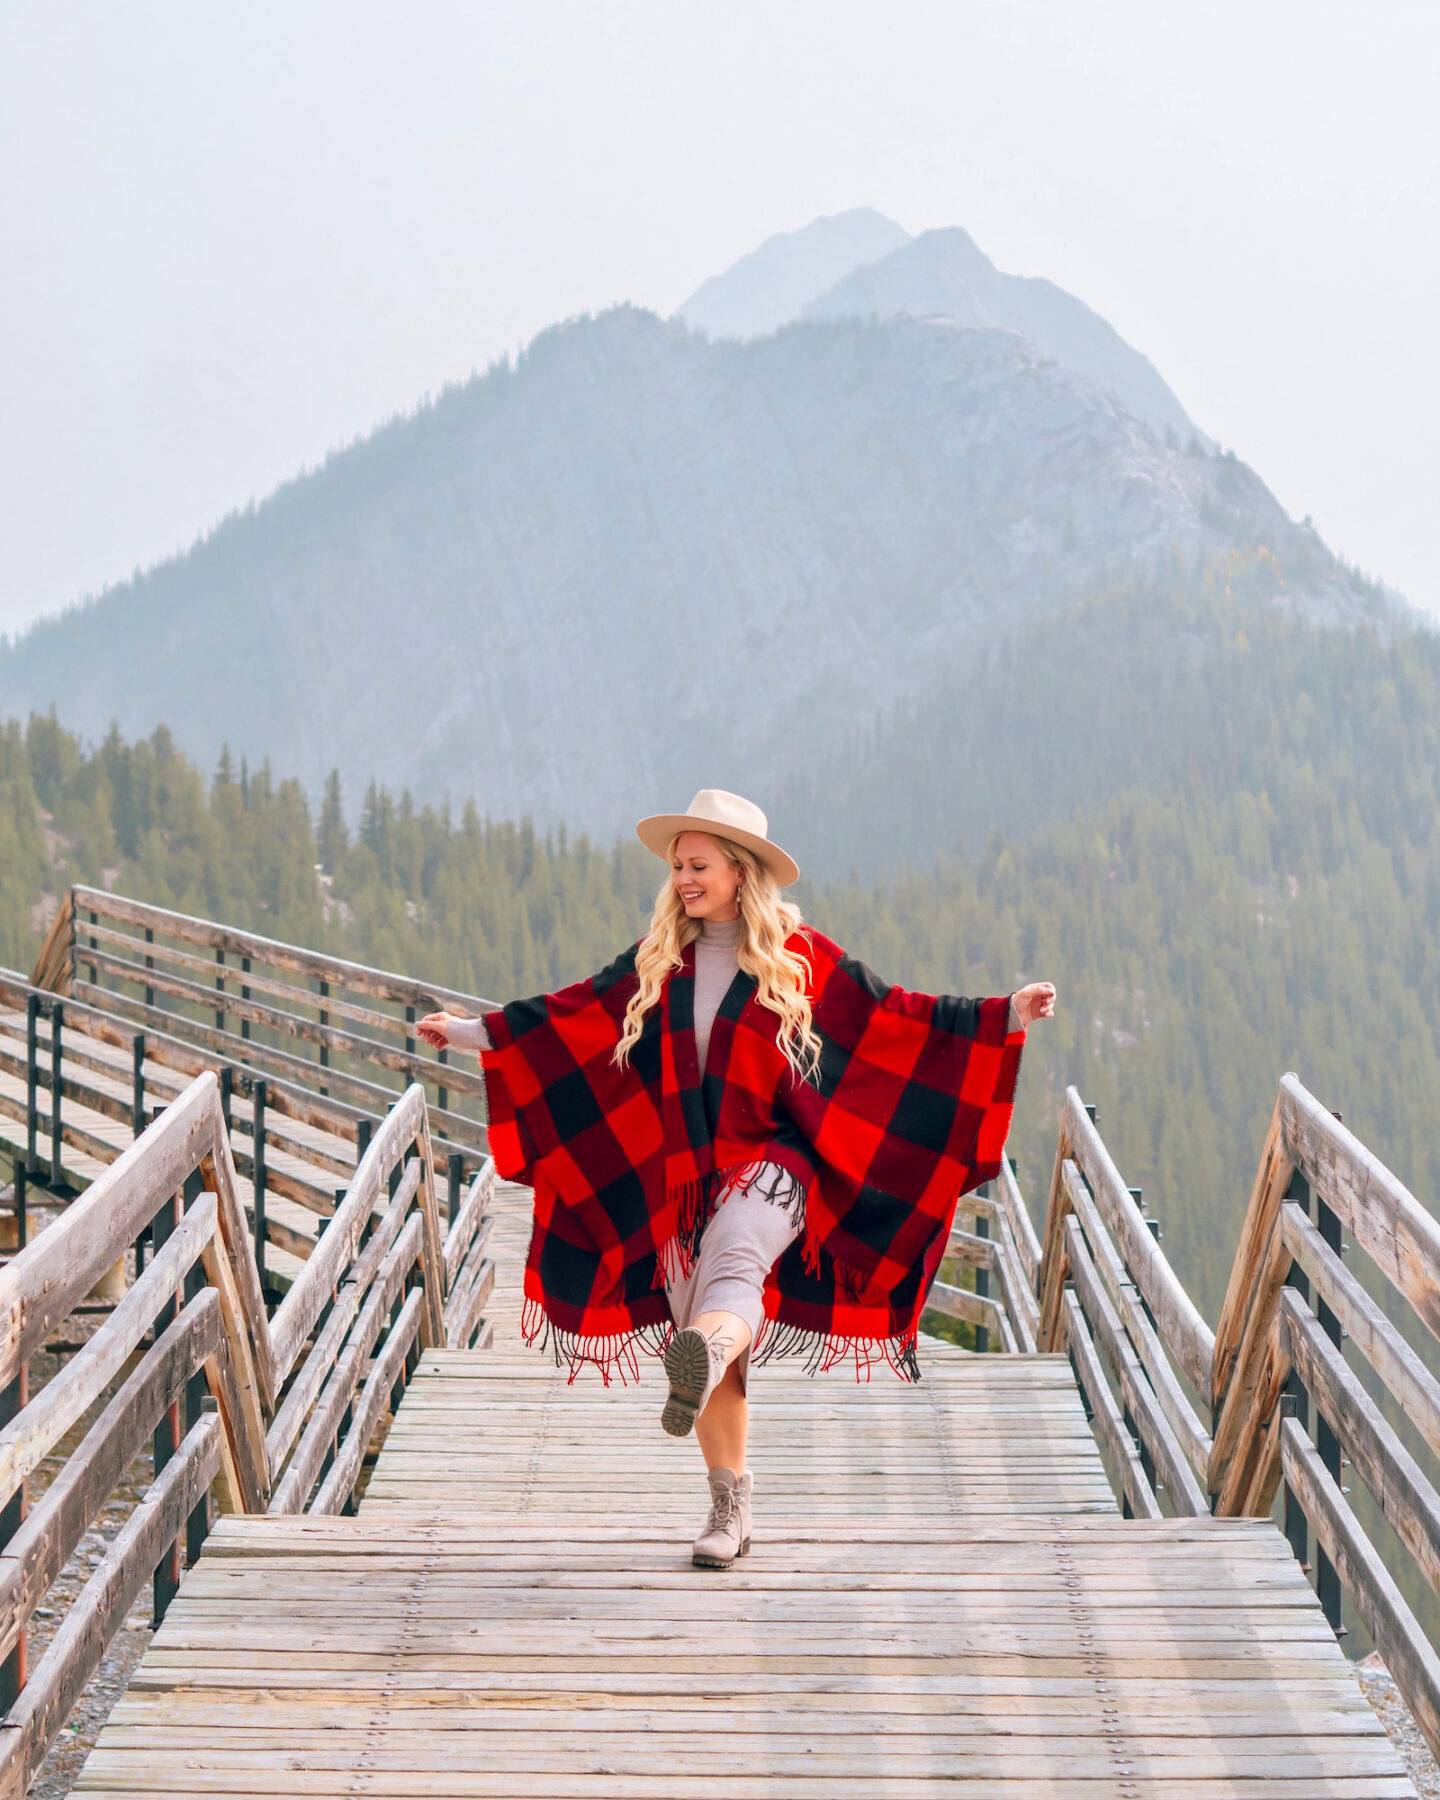 Visiting Banff National Park soon? Don't miss this guide of the 50 best things to in Banff for every kind of traveler! I recently spent 8 days exploring the area and took notes along the way so I could write you the most comprehensive guide possible. This guide includes all the top attractions, hikes, restaurants, and sights you definitely won't want to miss when you visit Banff National Park. I also include any tips you might need when visiting the area! Pictured here: The Banff gondola